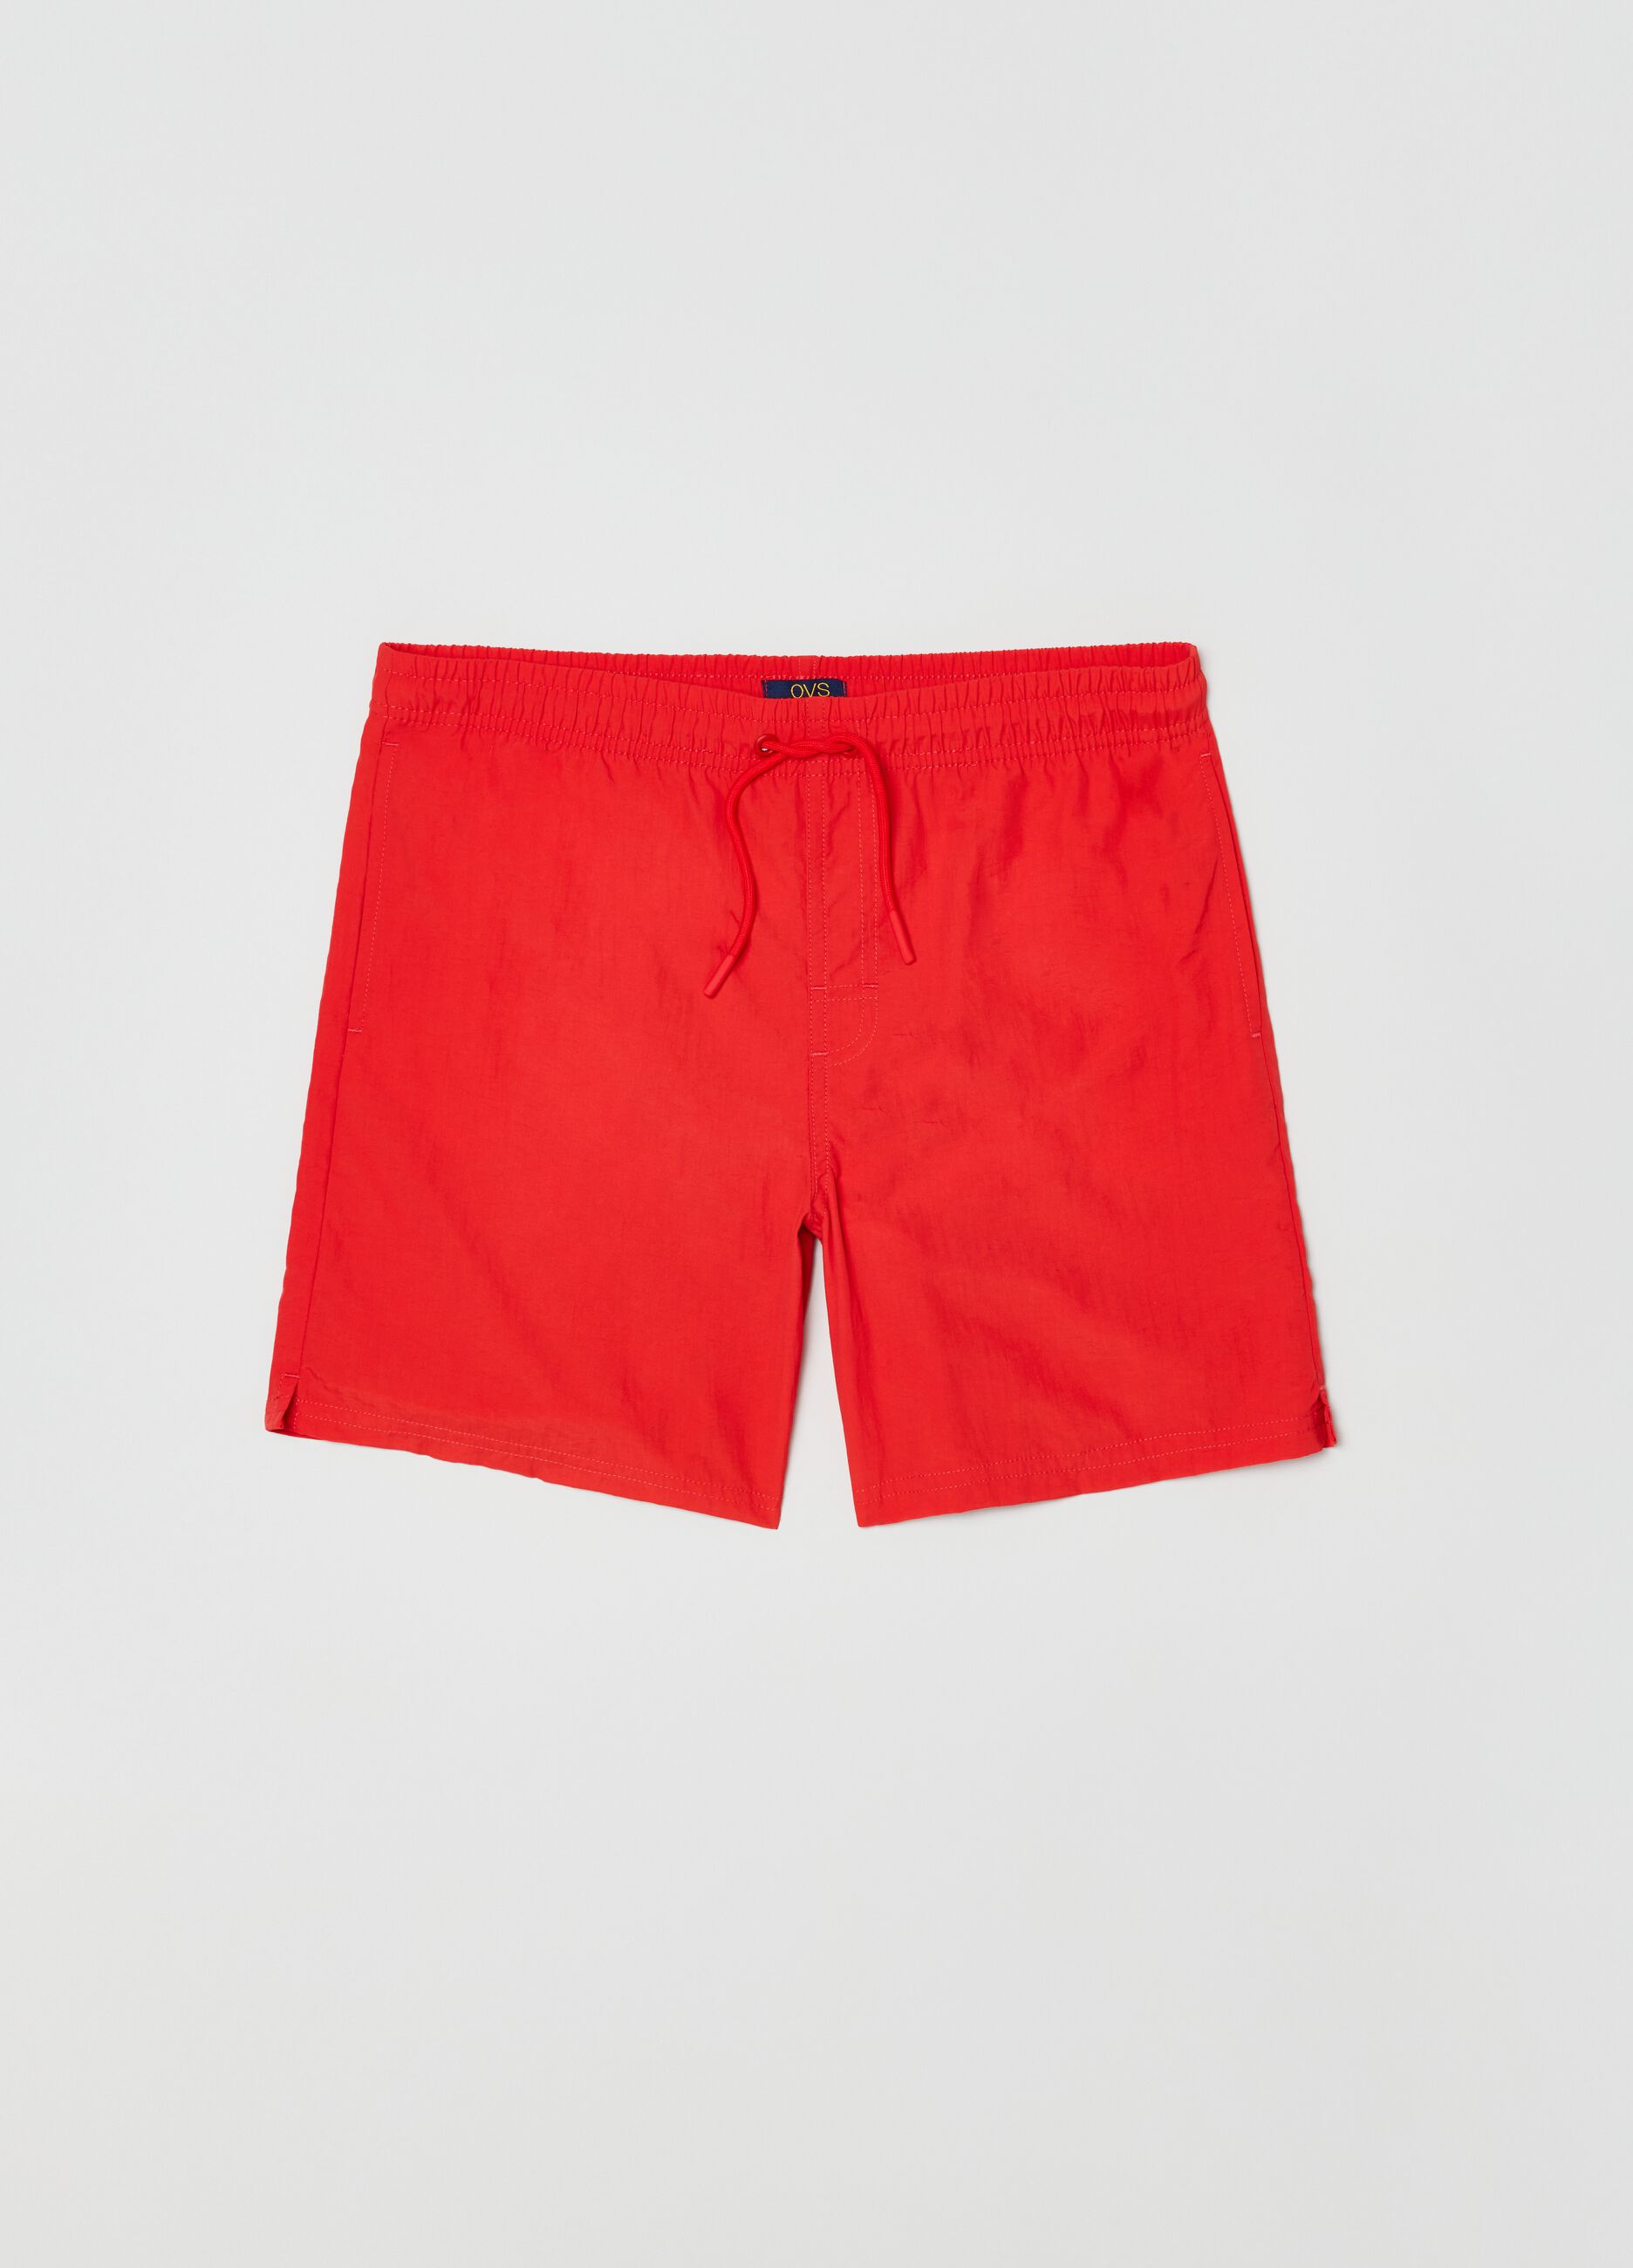 Swimming trunks with drawstring